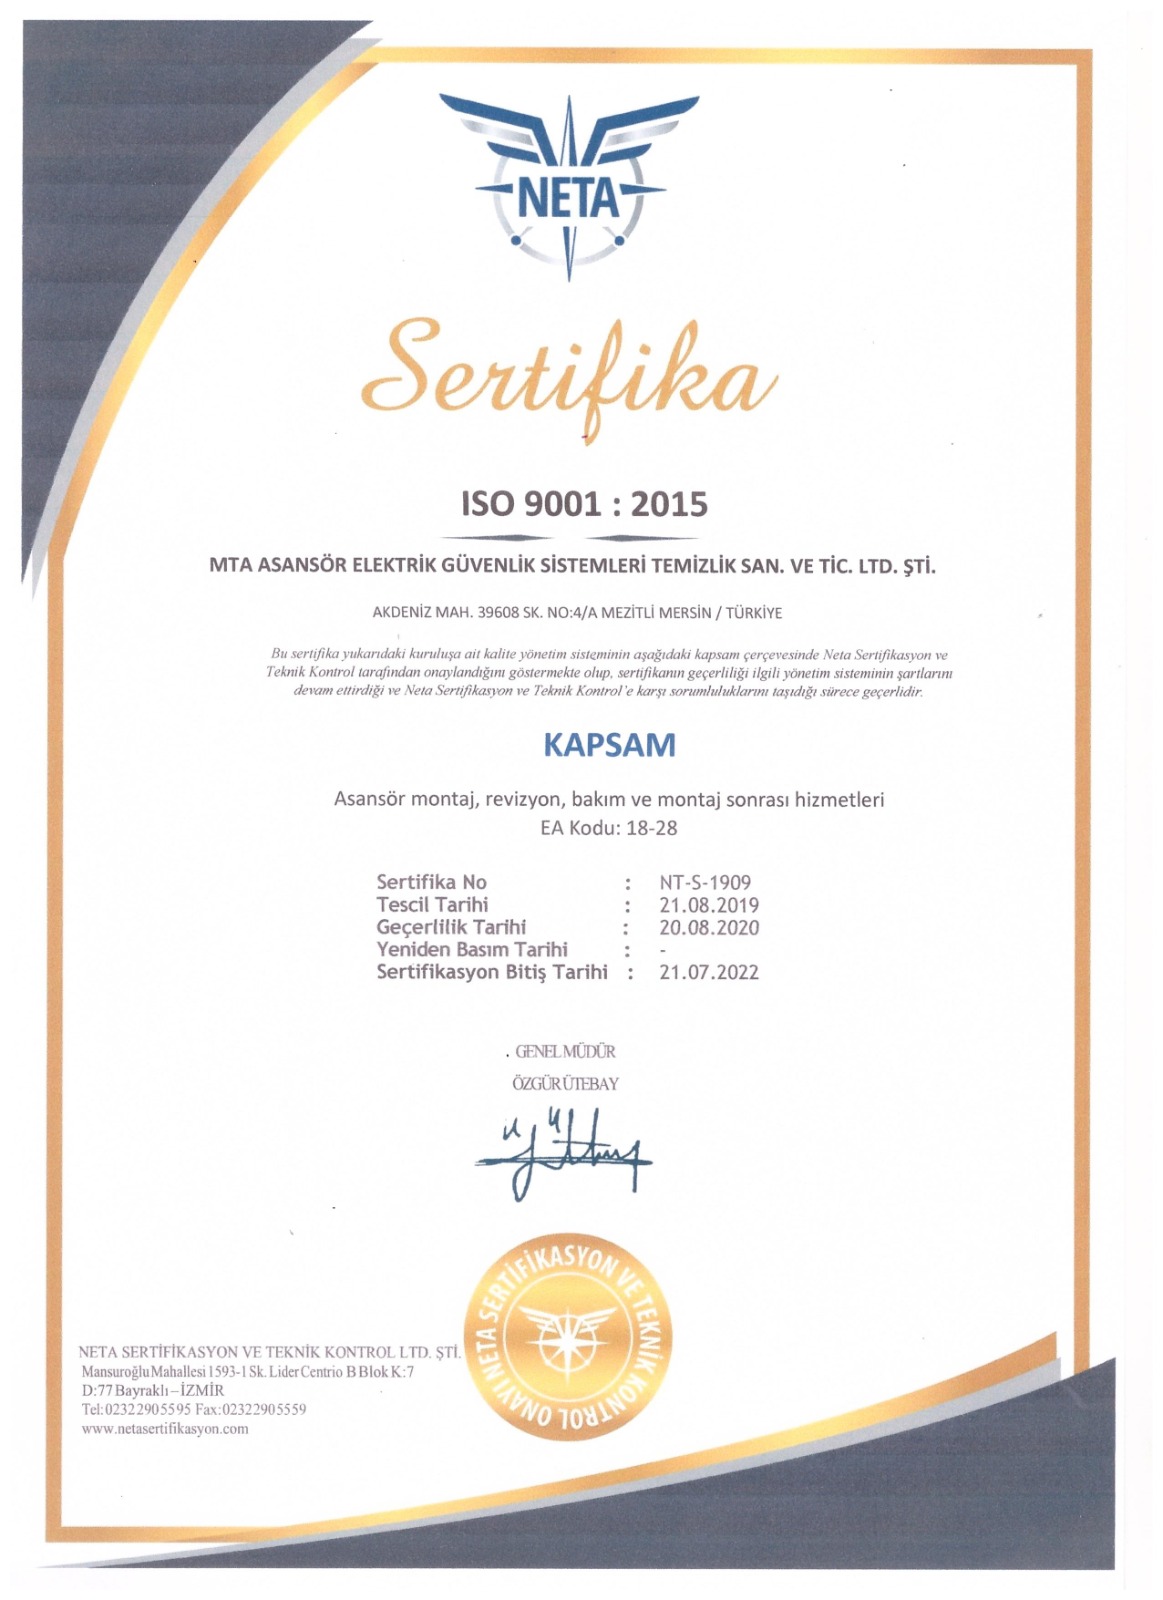 ISO-9001 : 2015